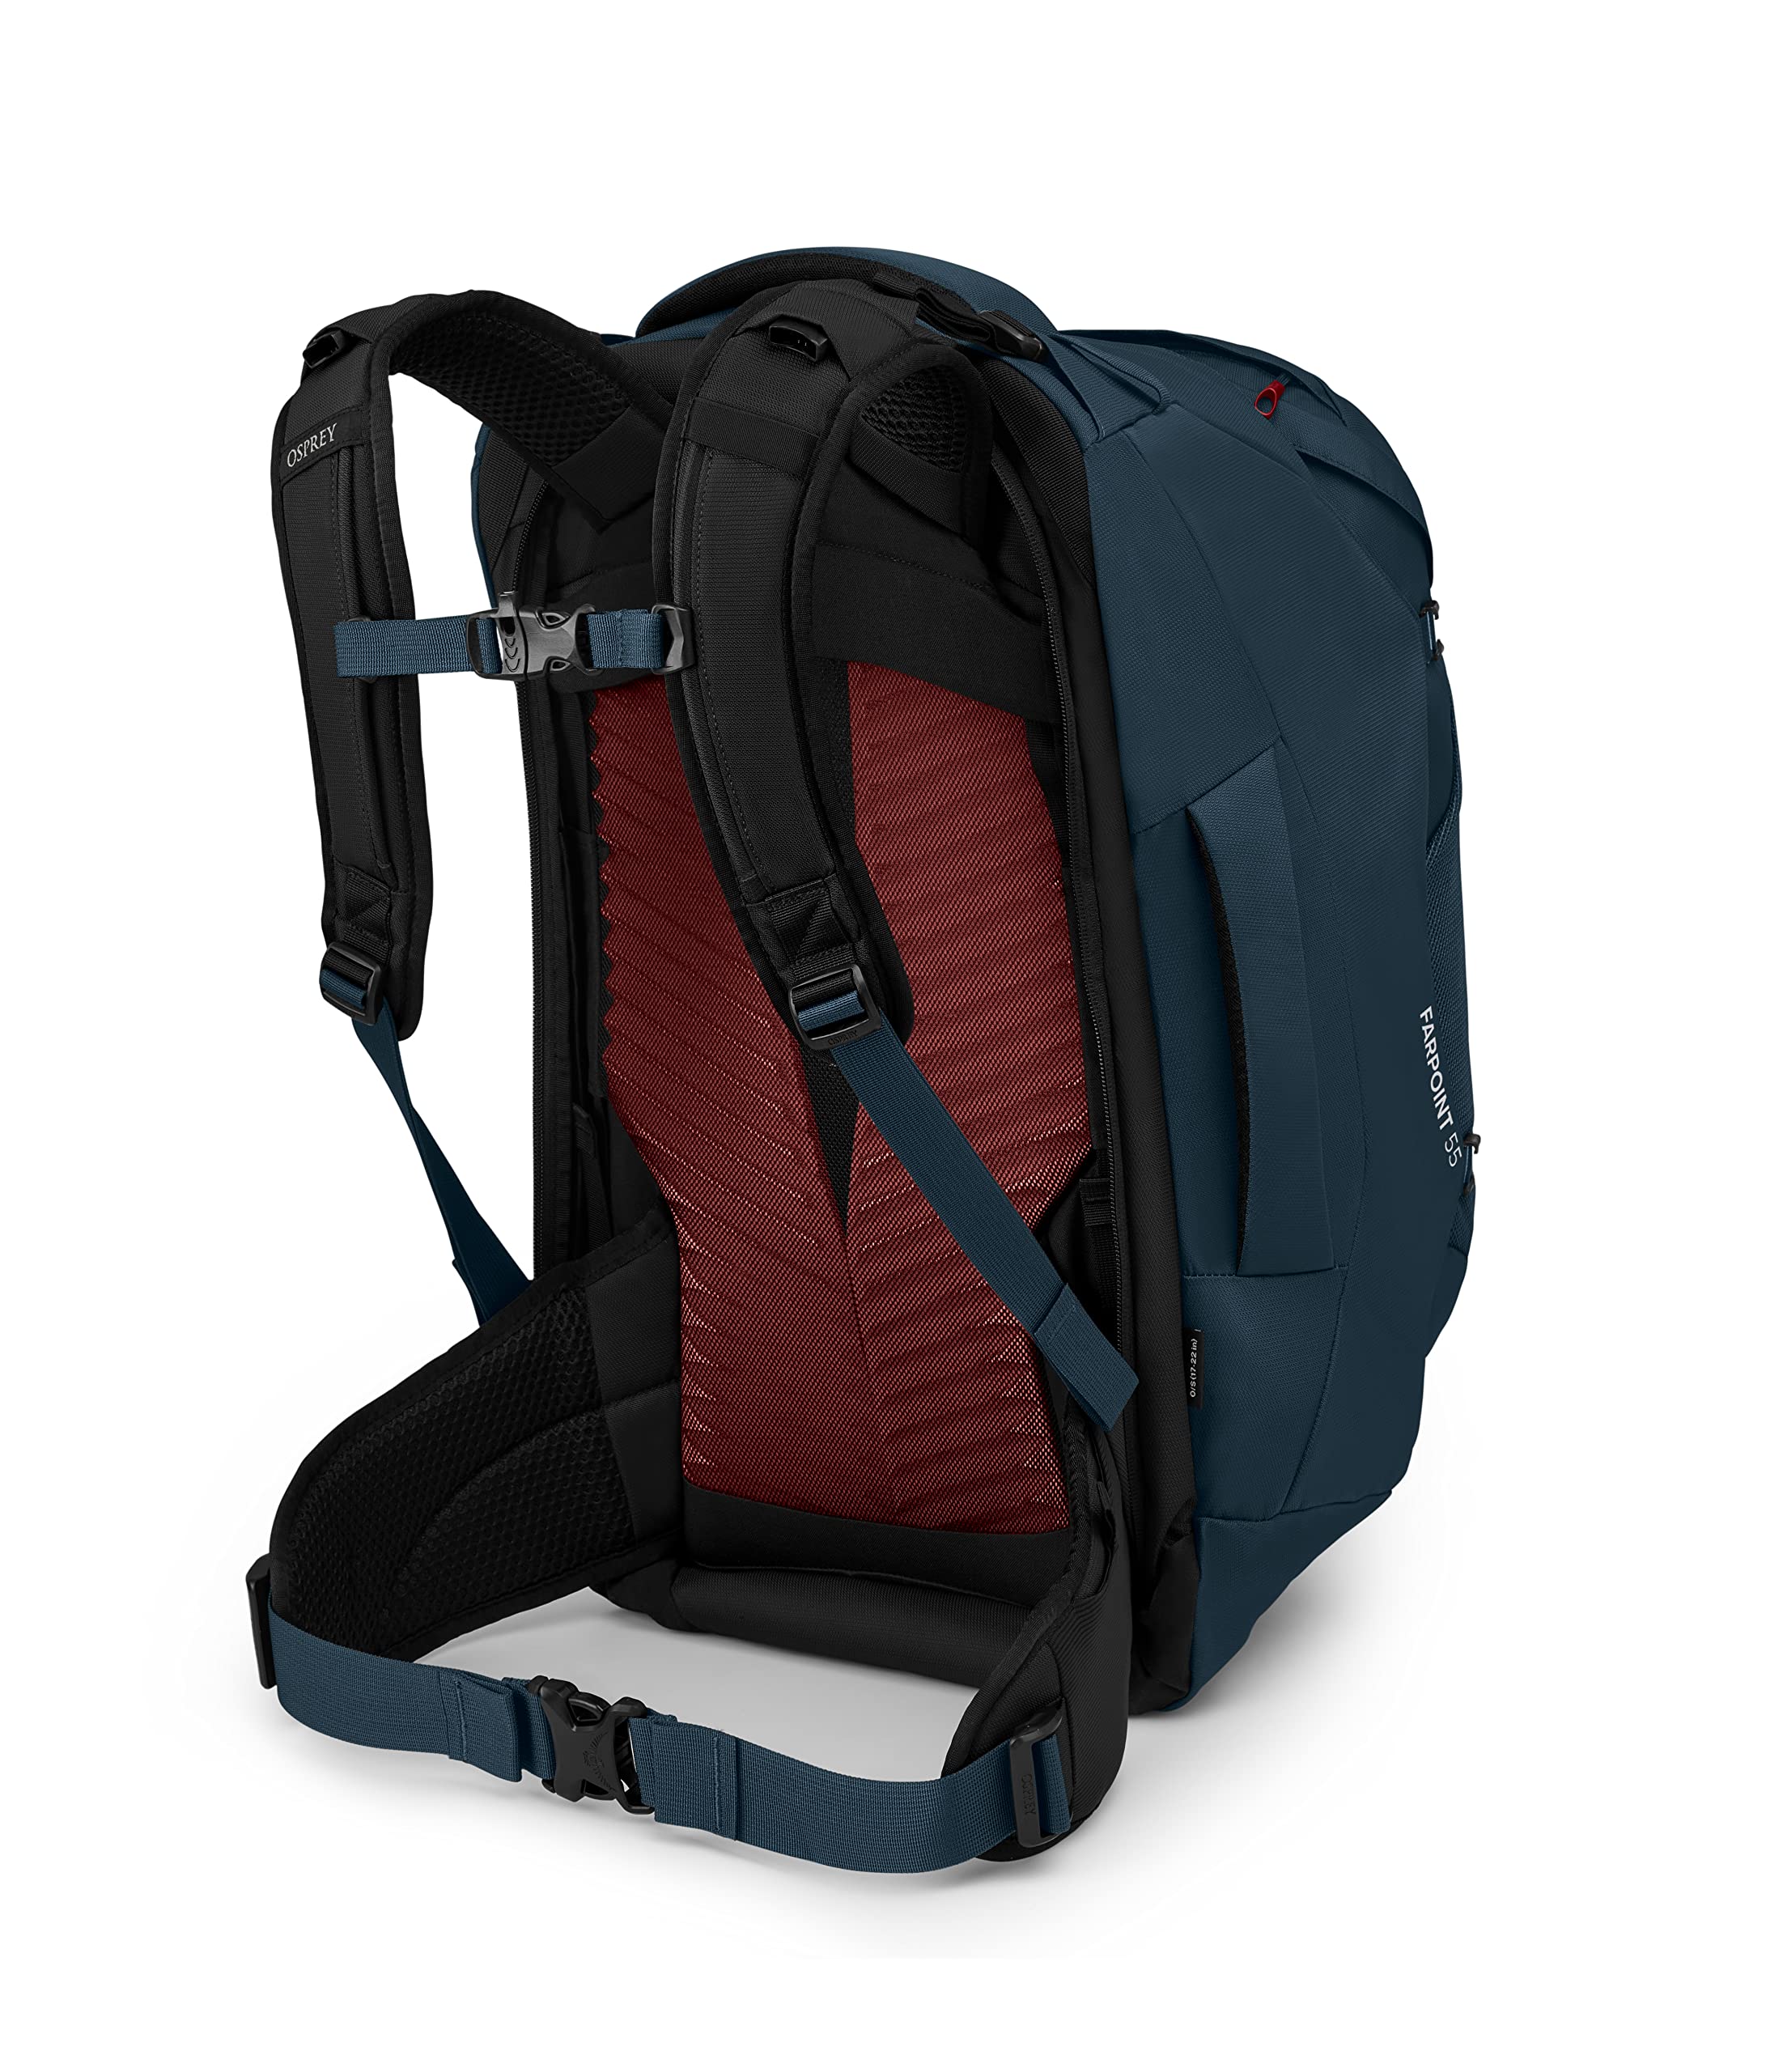 Osprey Farpoint 55 Men's Travel Backpack, Muted Space Blue